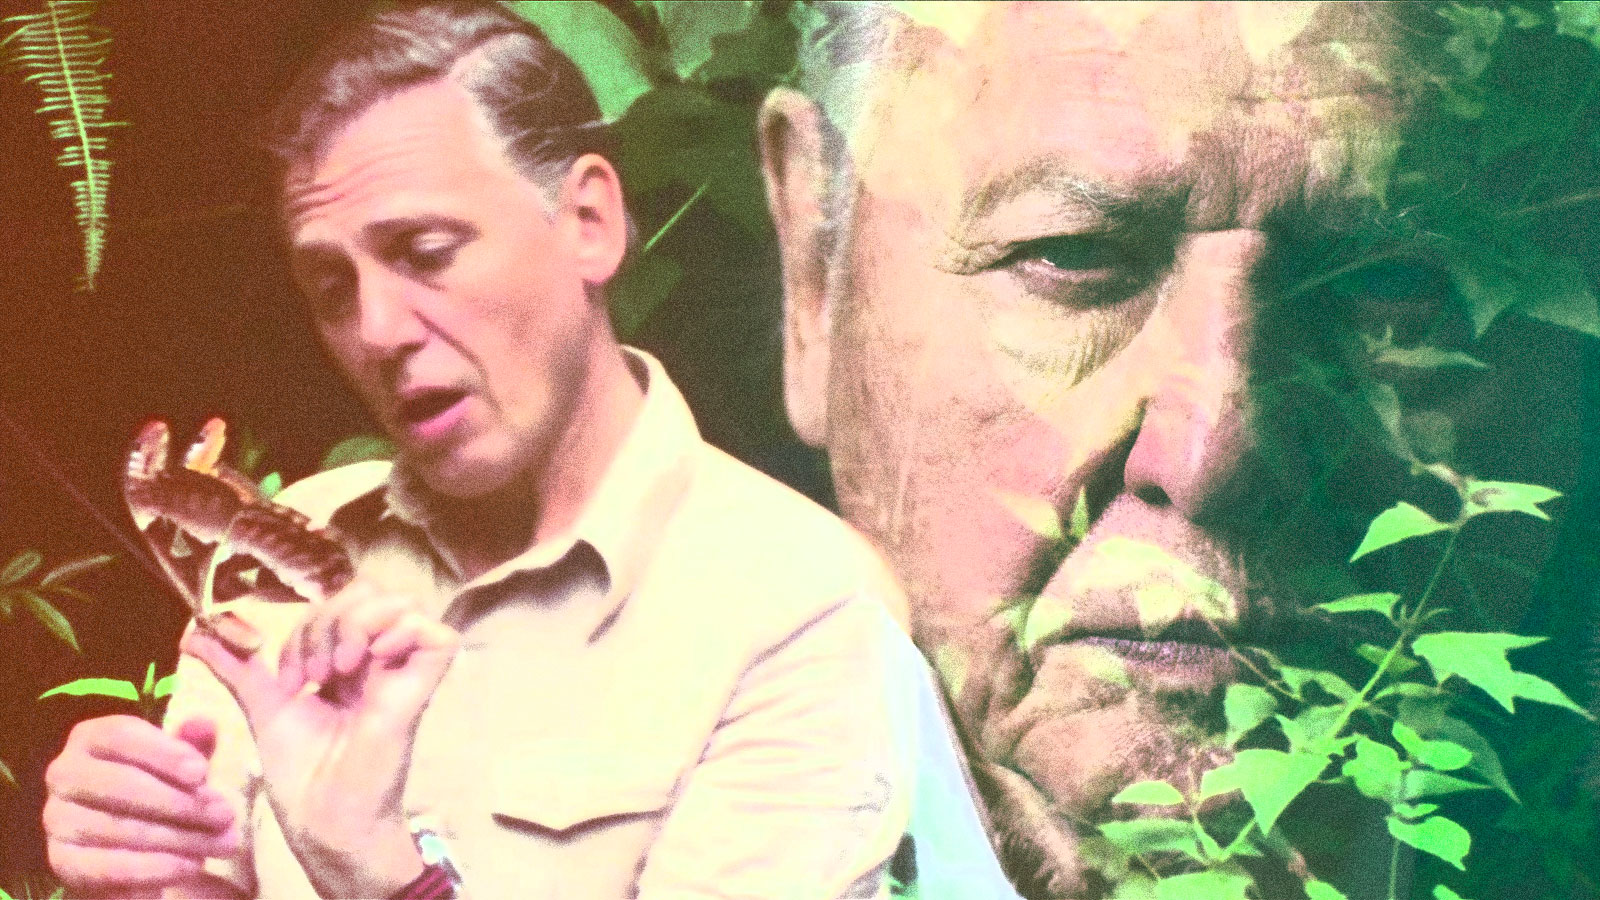 David Attenborough's face superimposed next to an image of his younger self.